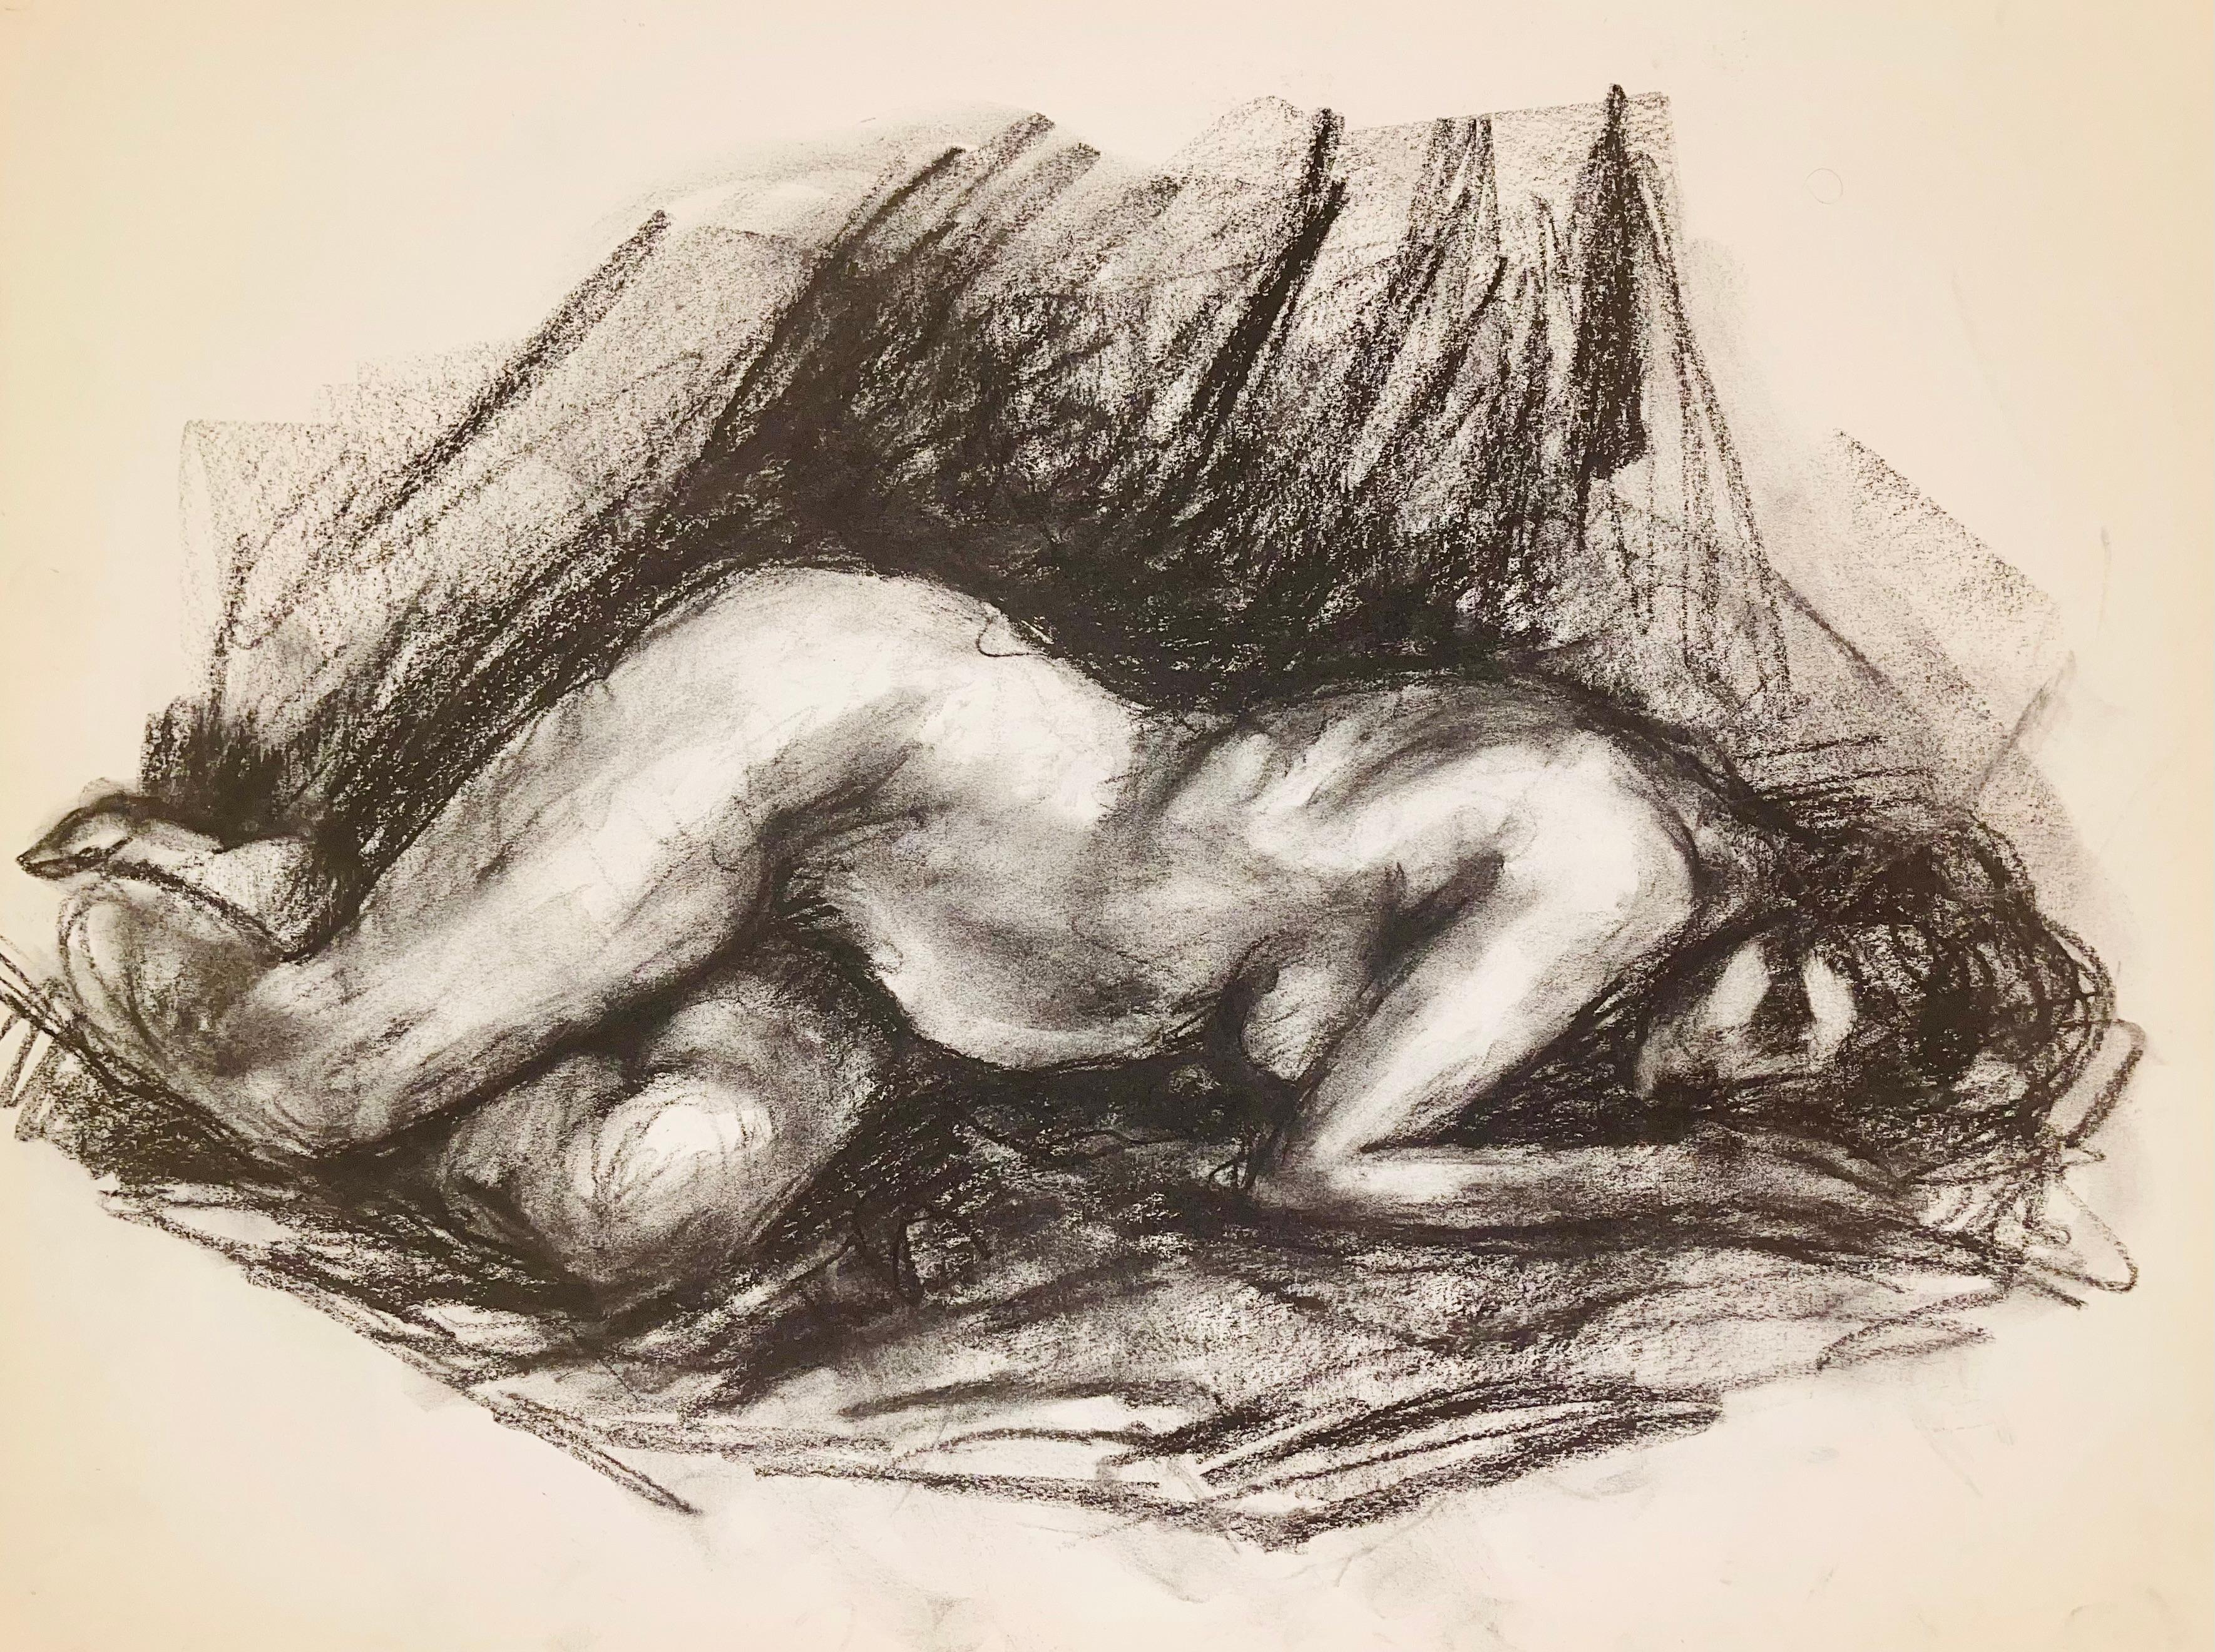 Original drawing on archival paper, circa 1963.  Paper Size: 18 x 23 inches. Provenance: Estate of Ian Hornak, East Hampton, New York. Notes: Created during Hornak’s undergraduate studies at Wayne State University in Detroit, Michigan.

IAN HORNAK